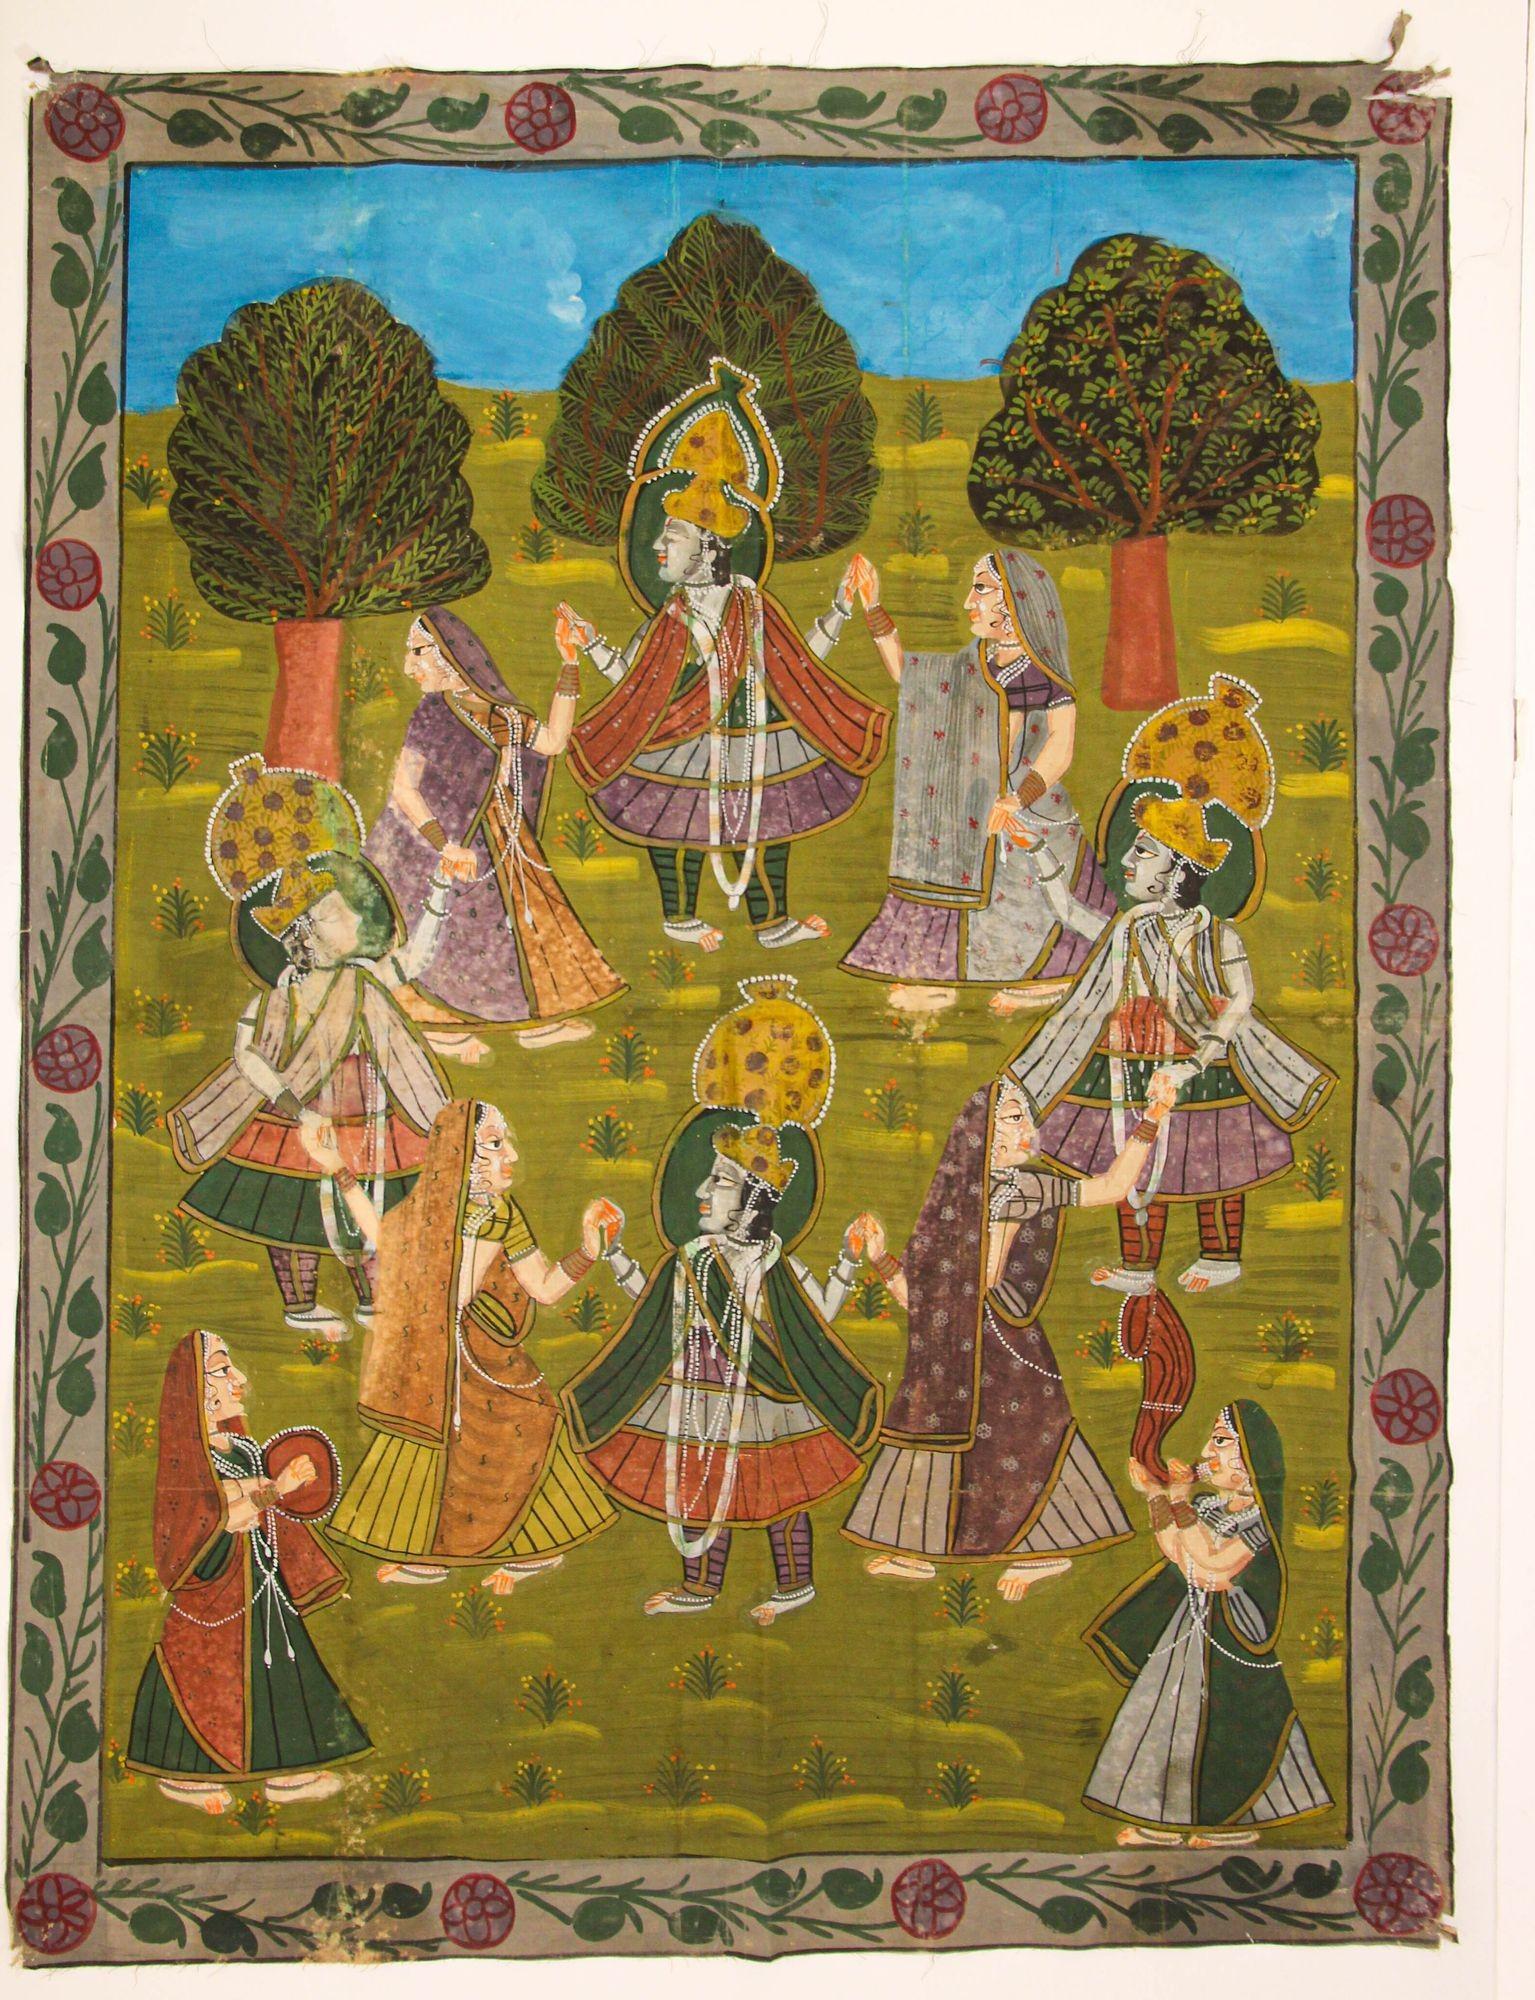 Large Vintage Pichhavai Painting of Krishna with Female Gopis Dancing.
Colorful Pichhavai hand painted on cotton cloth, circa 1940, depicting a scene from the life of Krishna, in a garden setting.
One of a kind Pichhavai painting of Krishna with